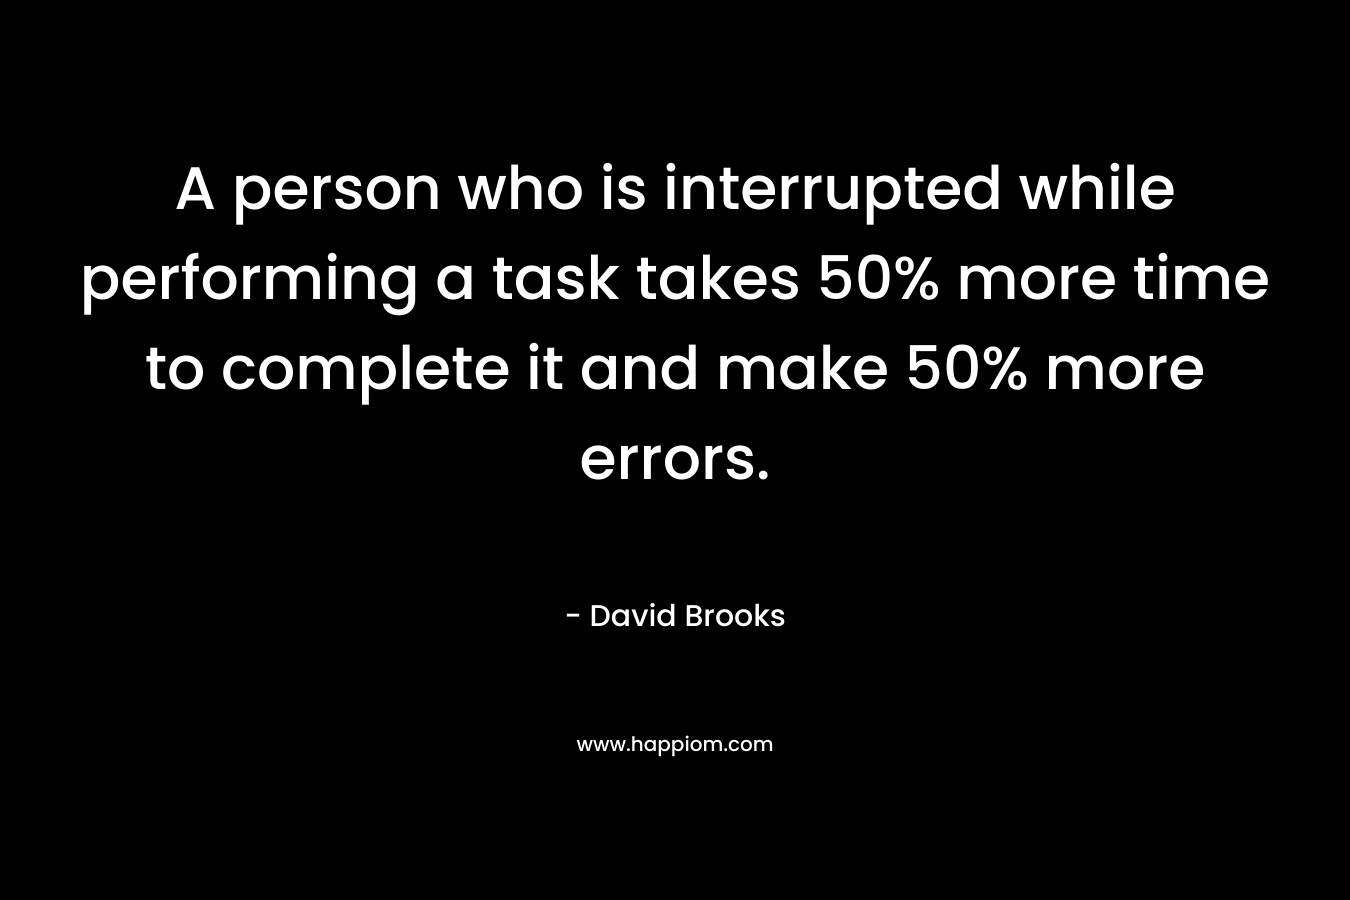 A person who is interrupted while performing a task takes 50% more time to complete it and make 50% more errors.